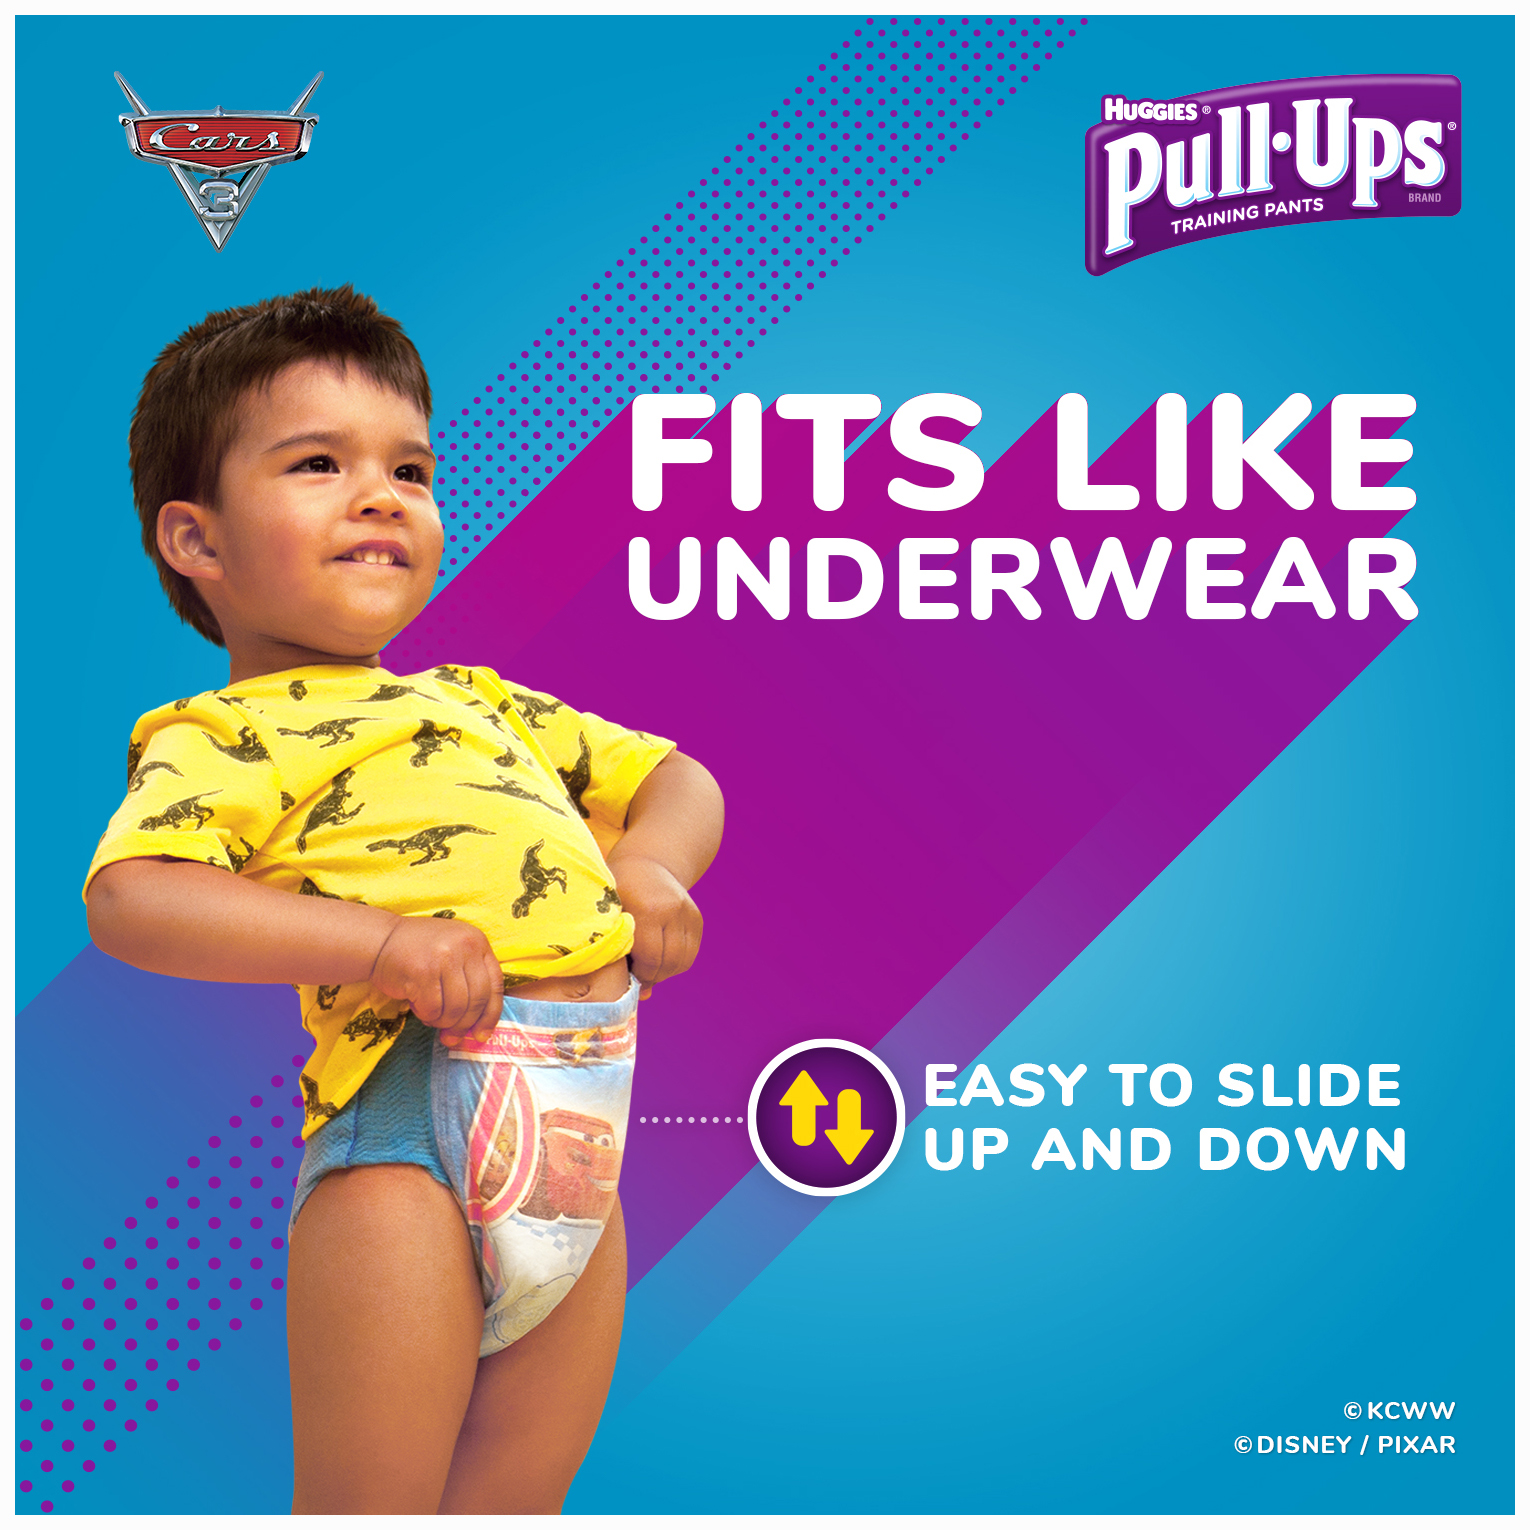 Pull-Ups Boys' Learning Designs Training Pants, Size 4T-5T, 40 Count - image 4 of 8